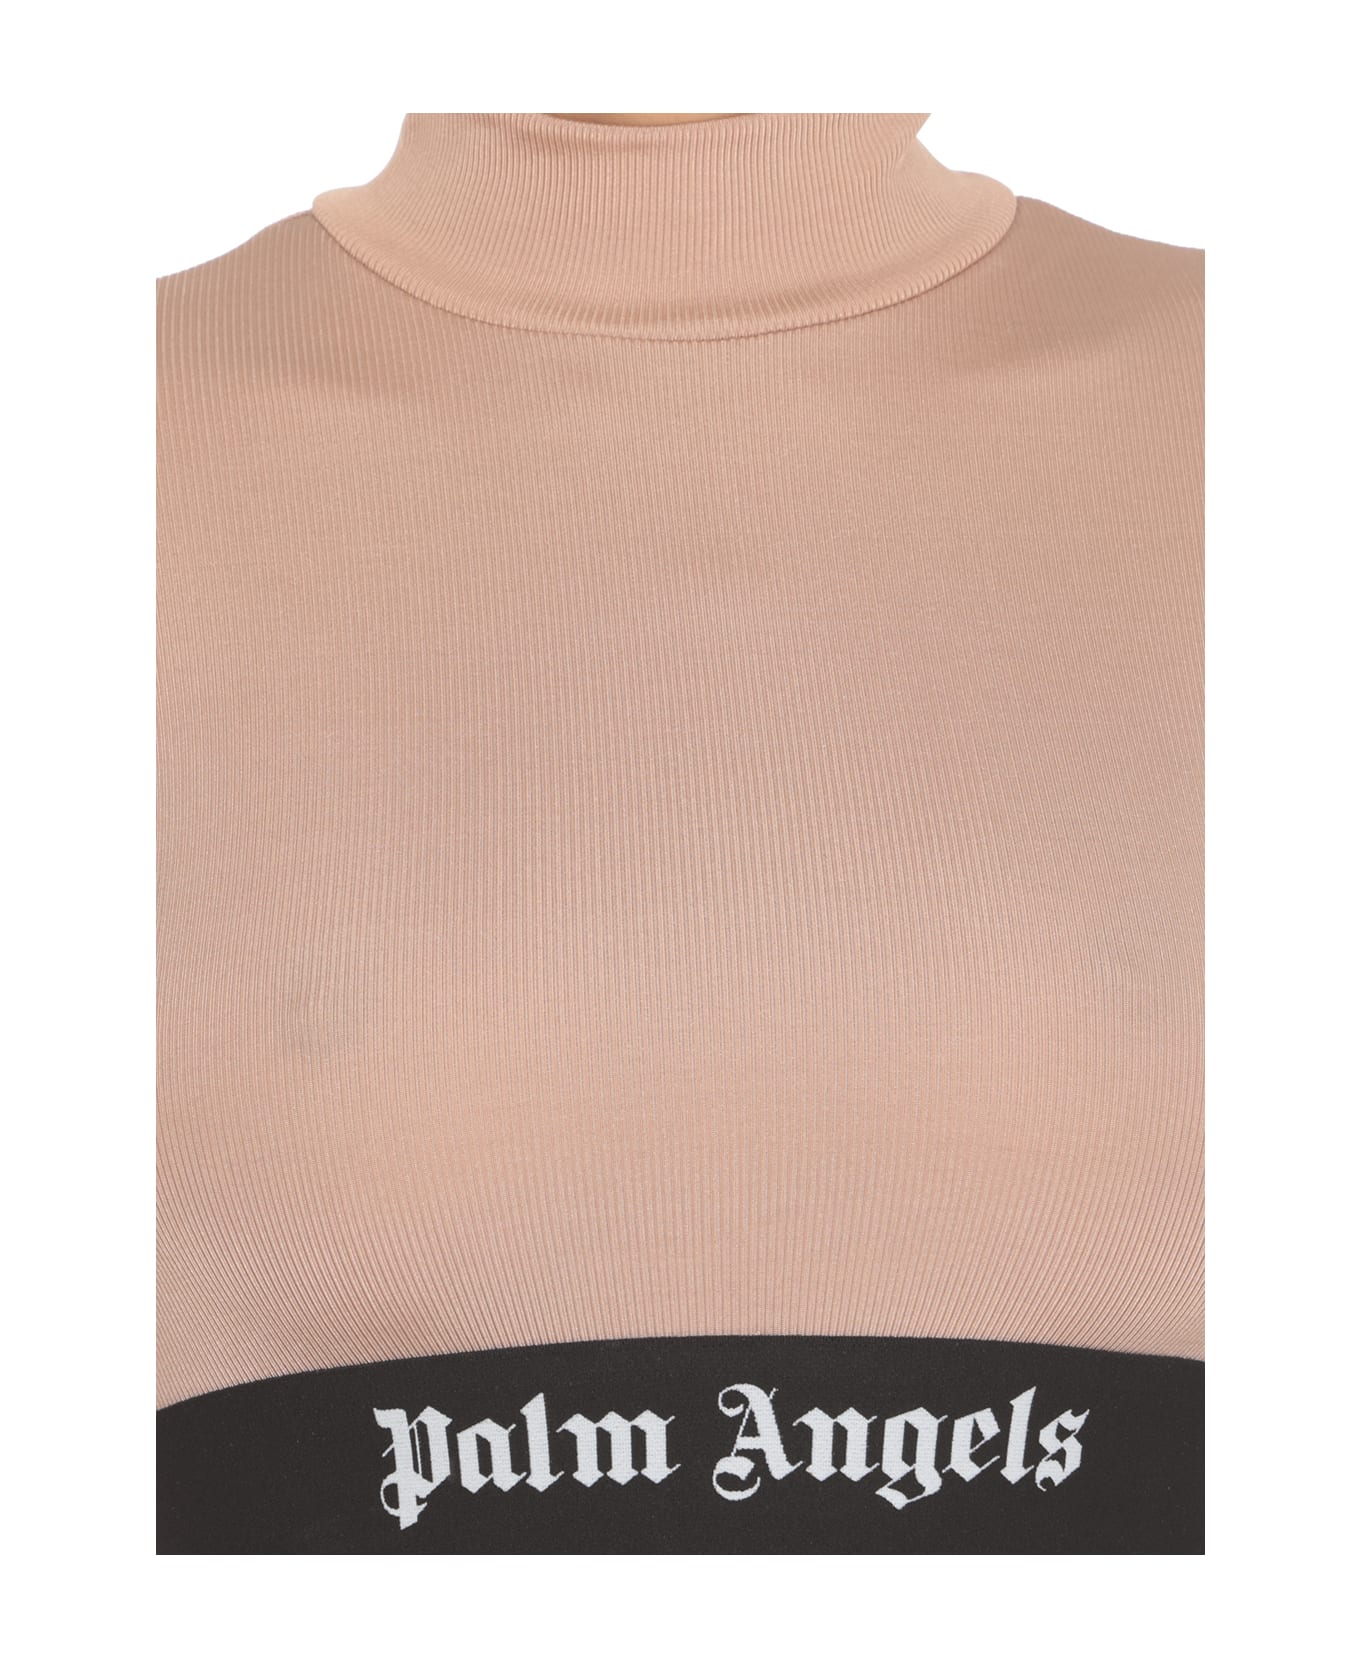 Palm Angels Cropped Top With Logo - Beige